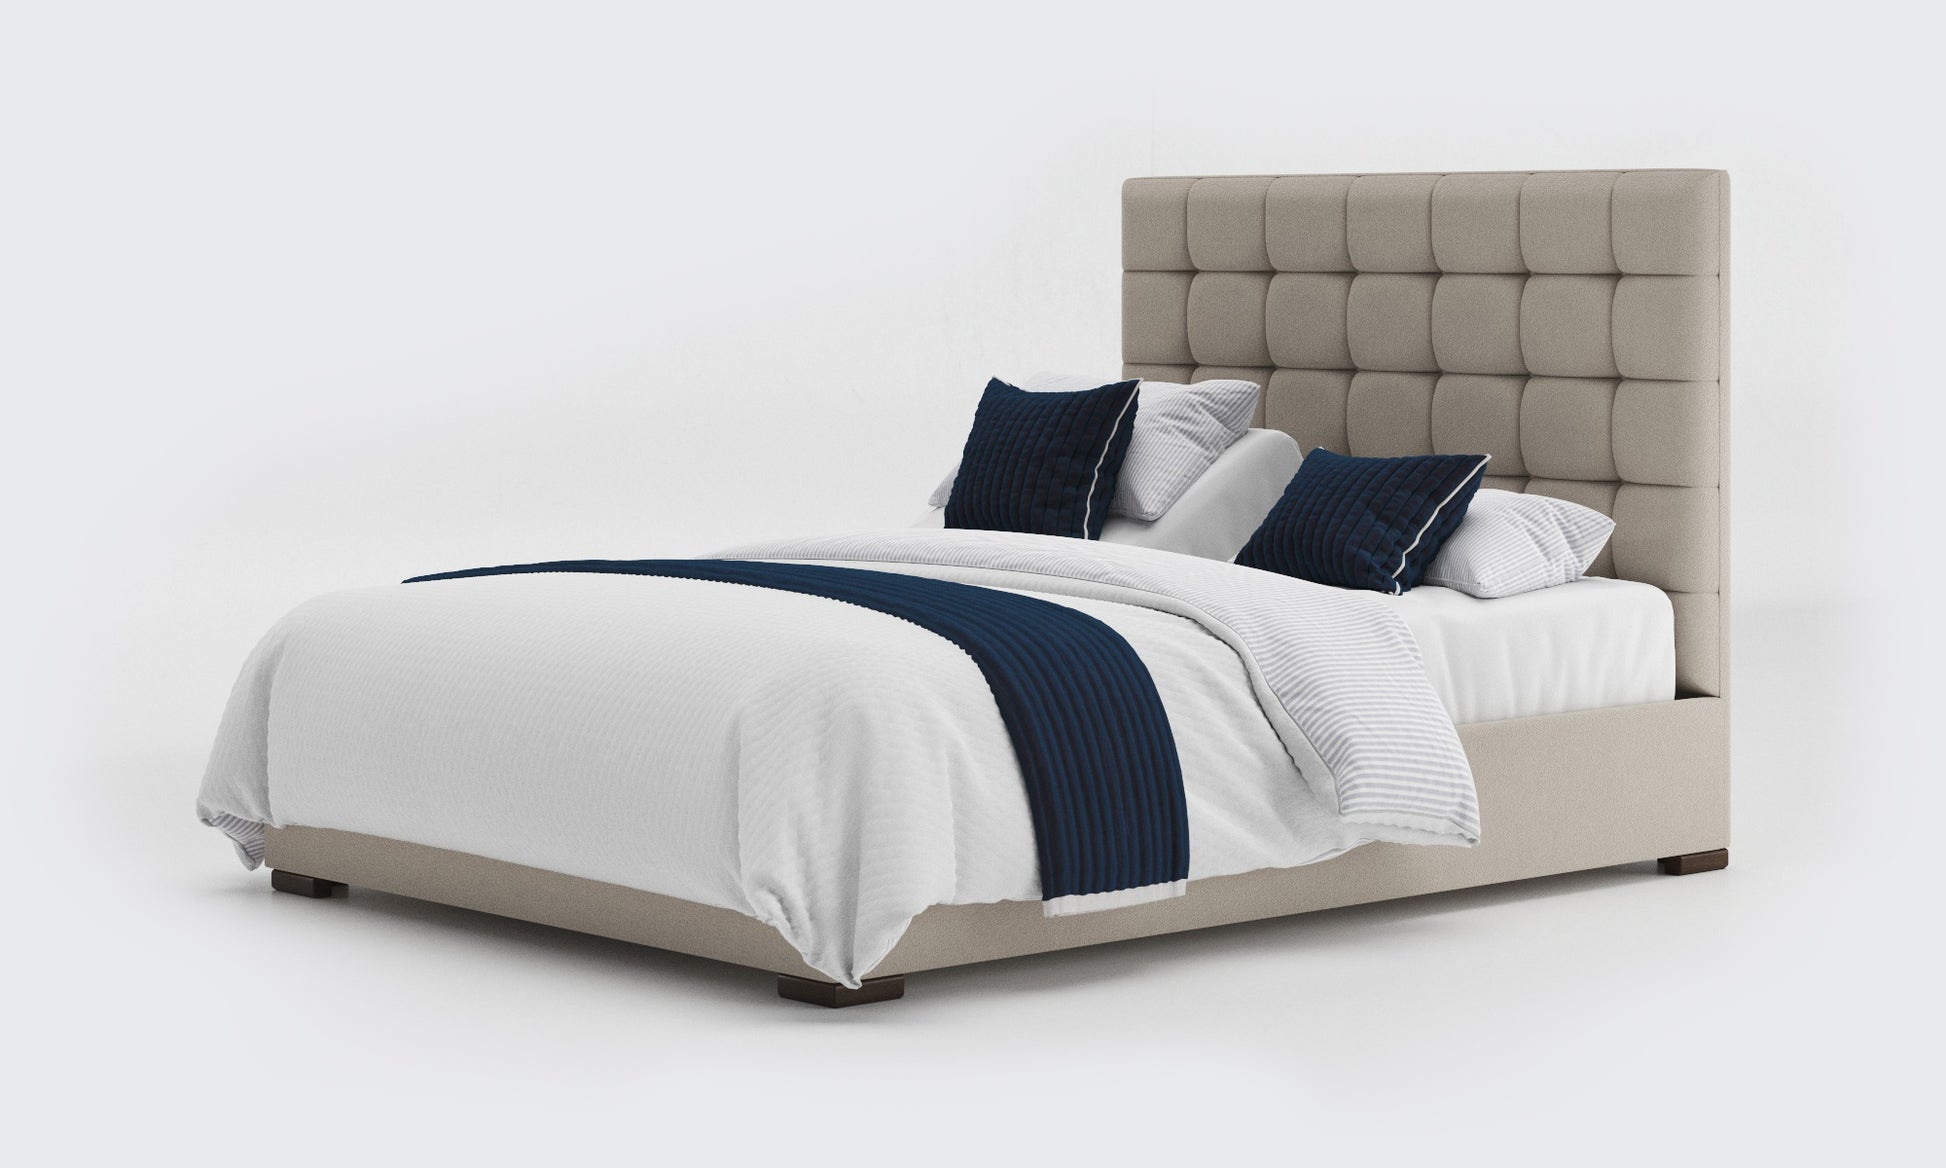 stratton 5ft king dual bed and mattresses in the linen material